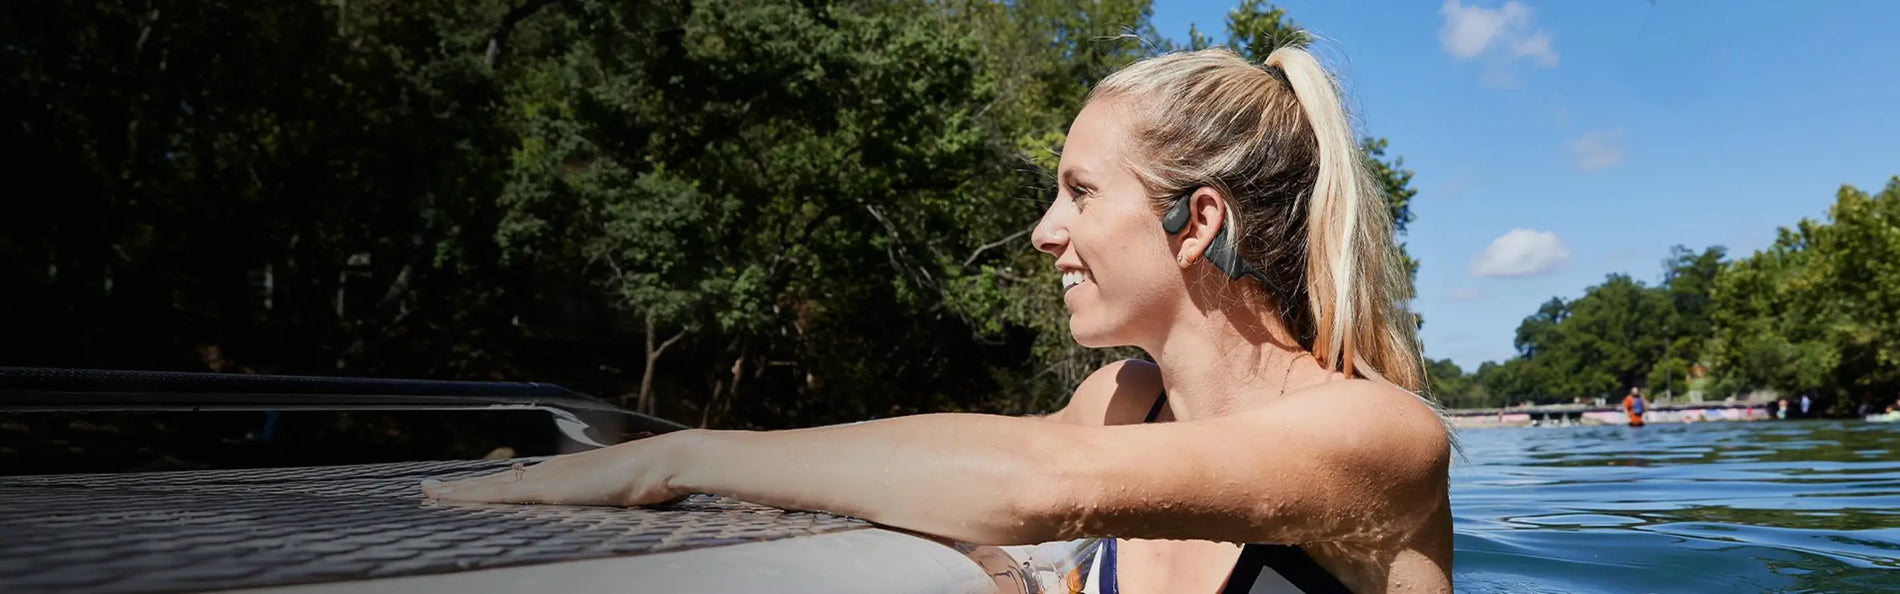 Open-Ear Comfort Our open-ear design powered by bone conduction technology ensures bud-free, comfortable listening all day, in or out of the water.